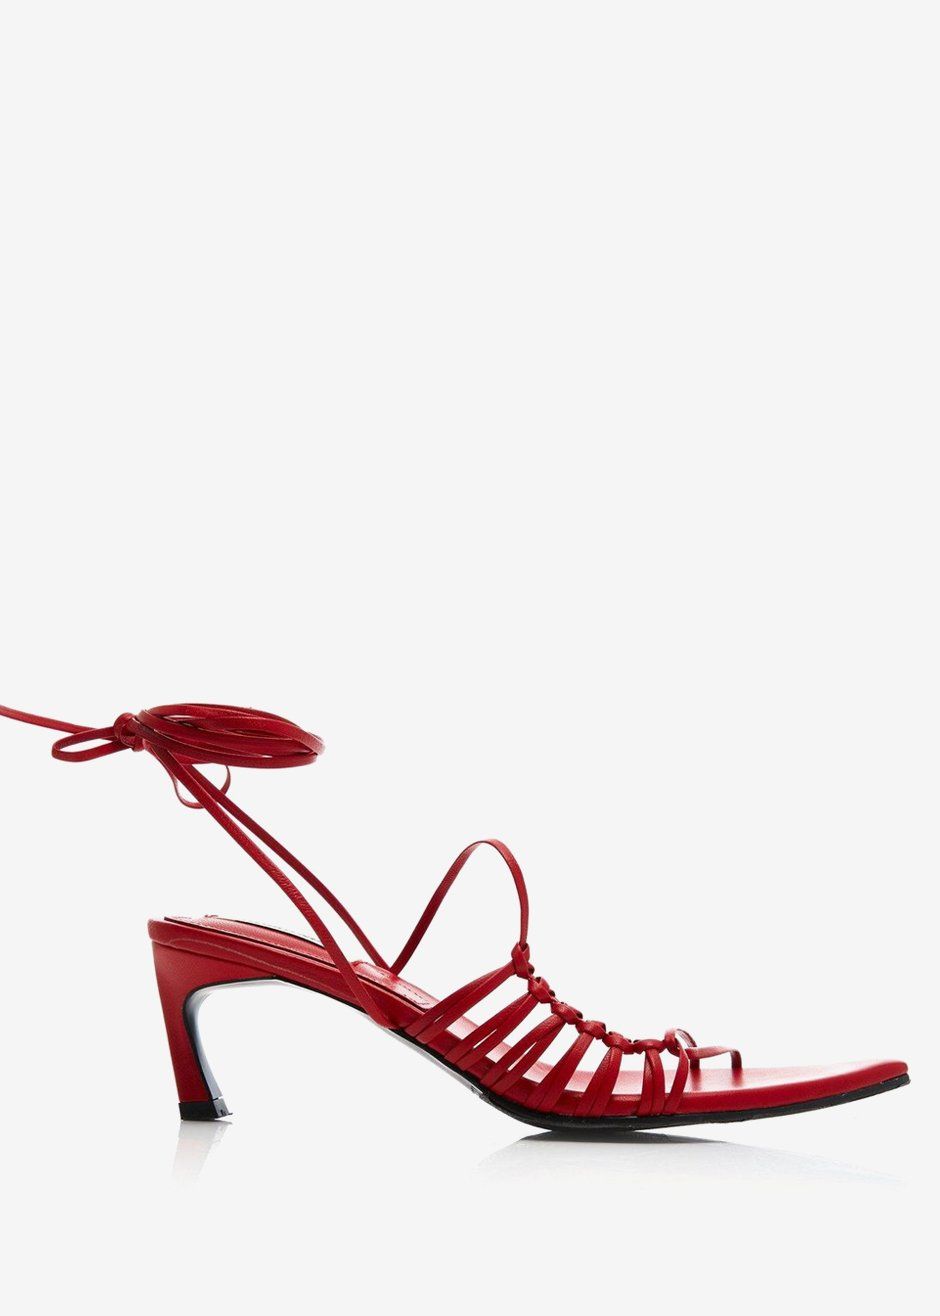 Reike Nen Pointy Lace-Up Sandals - Tomato Red